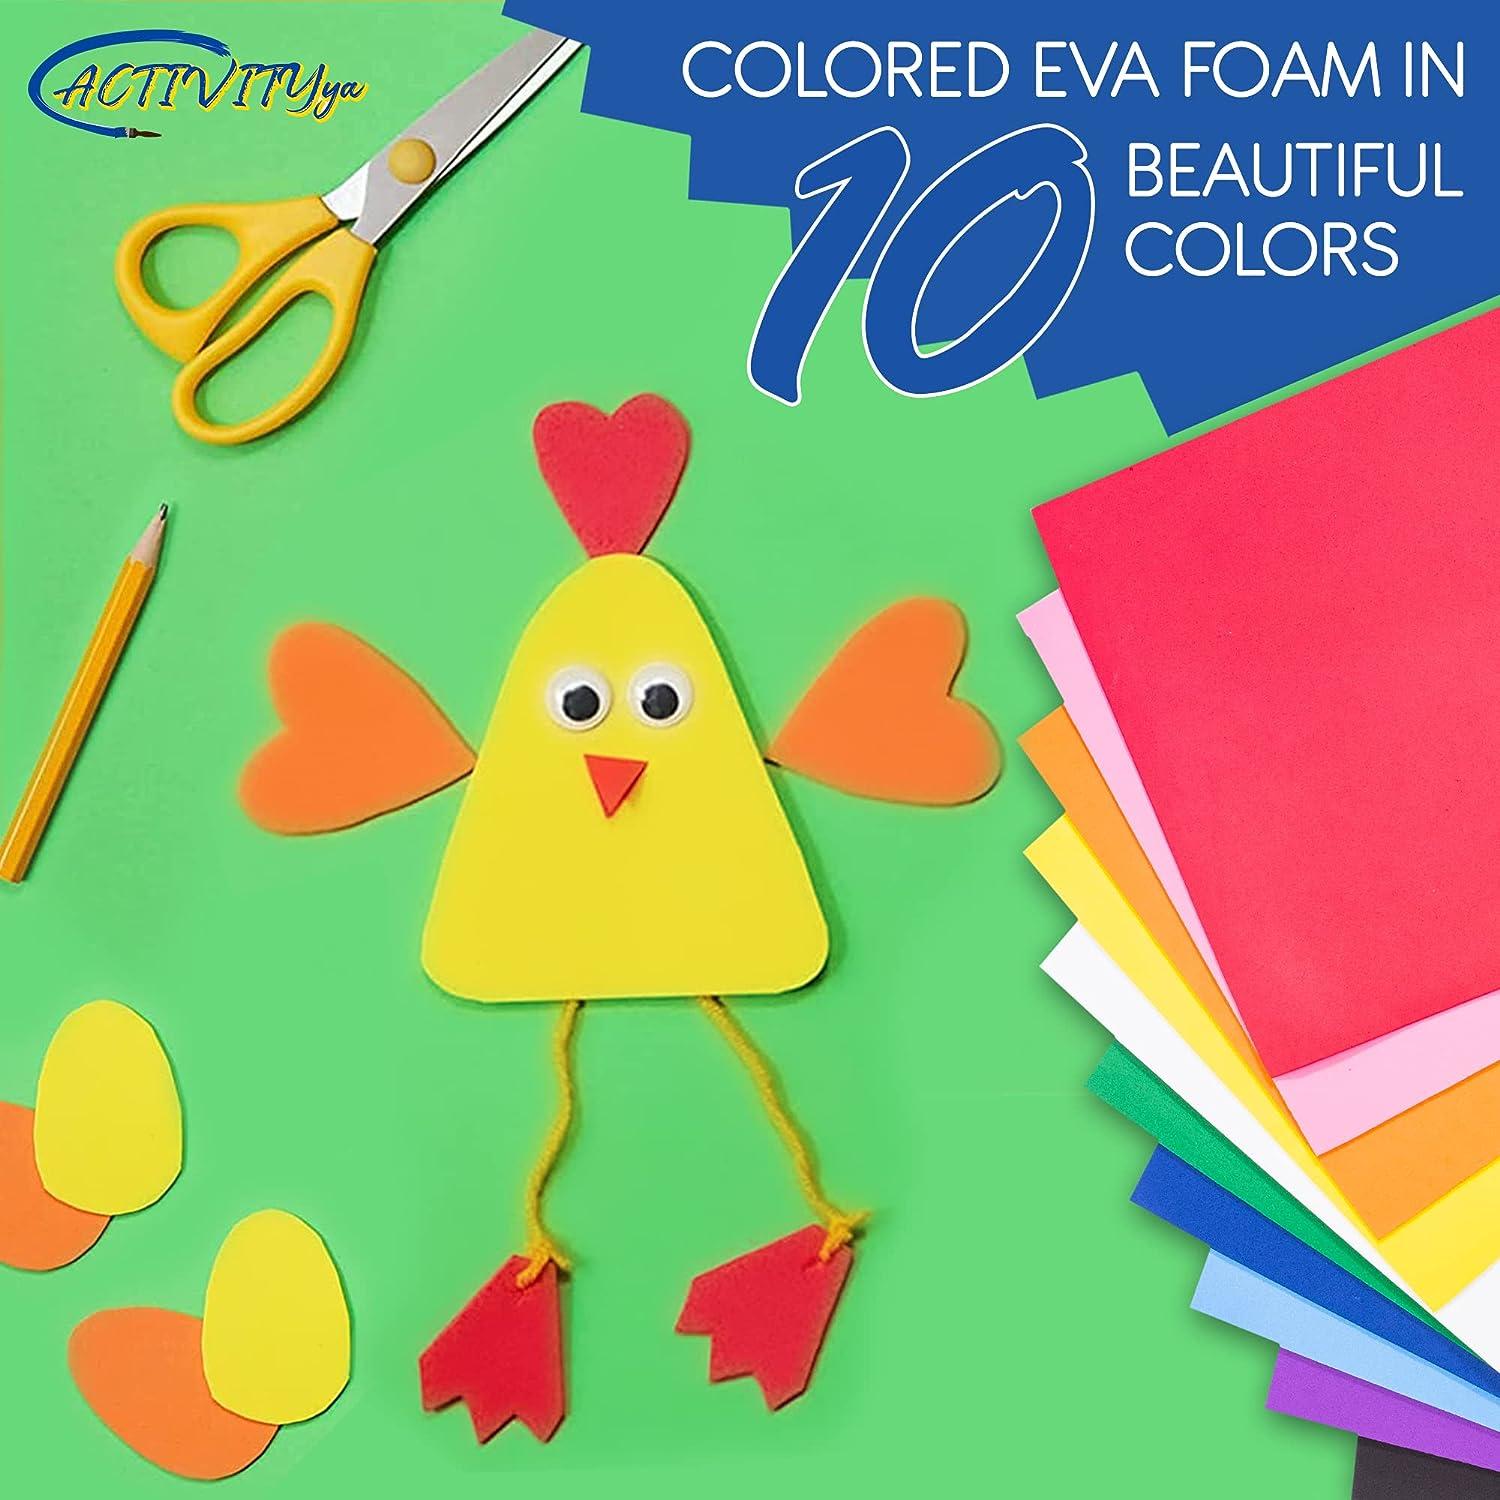  30 Pack EVA Foam Sheets, 9 x 12 Inch, Assorted Colors (10  Colors), 2mm Thick, by Better Office Products, for Arts and Crafts, 30  Sheets : Arts, Crafts & Sewing